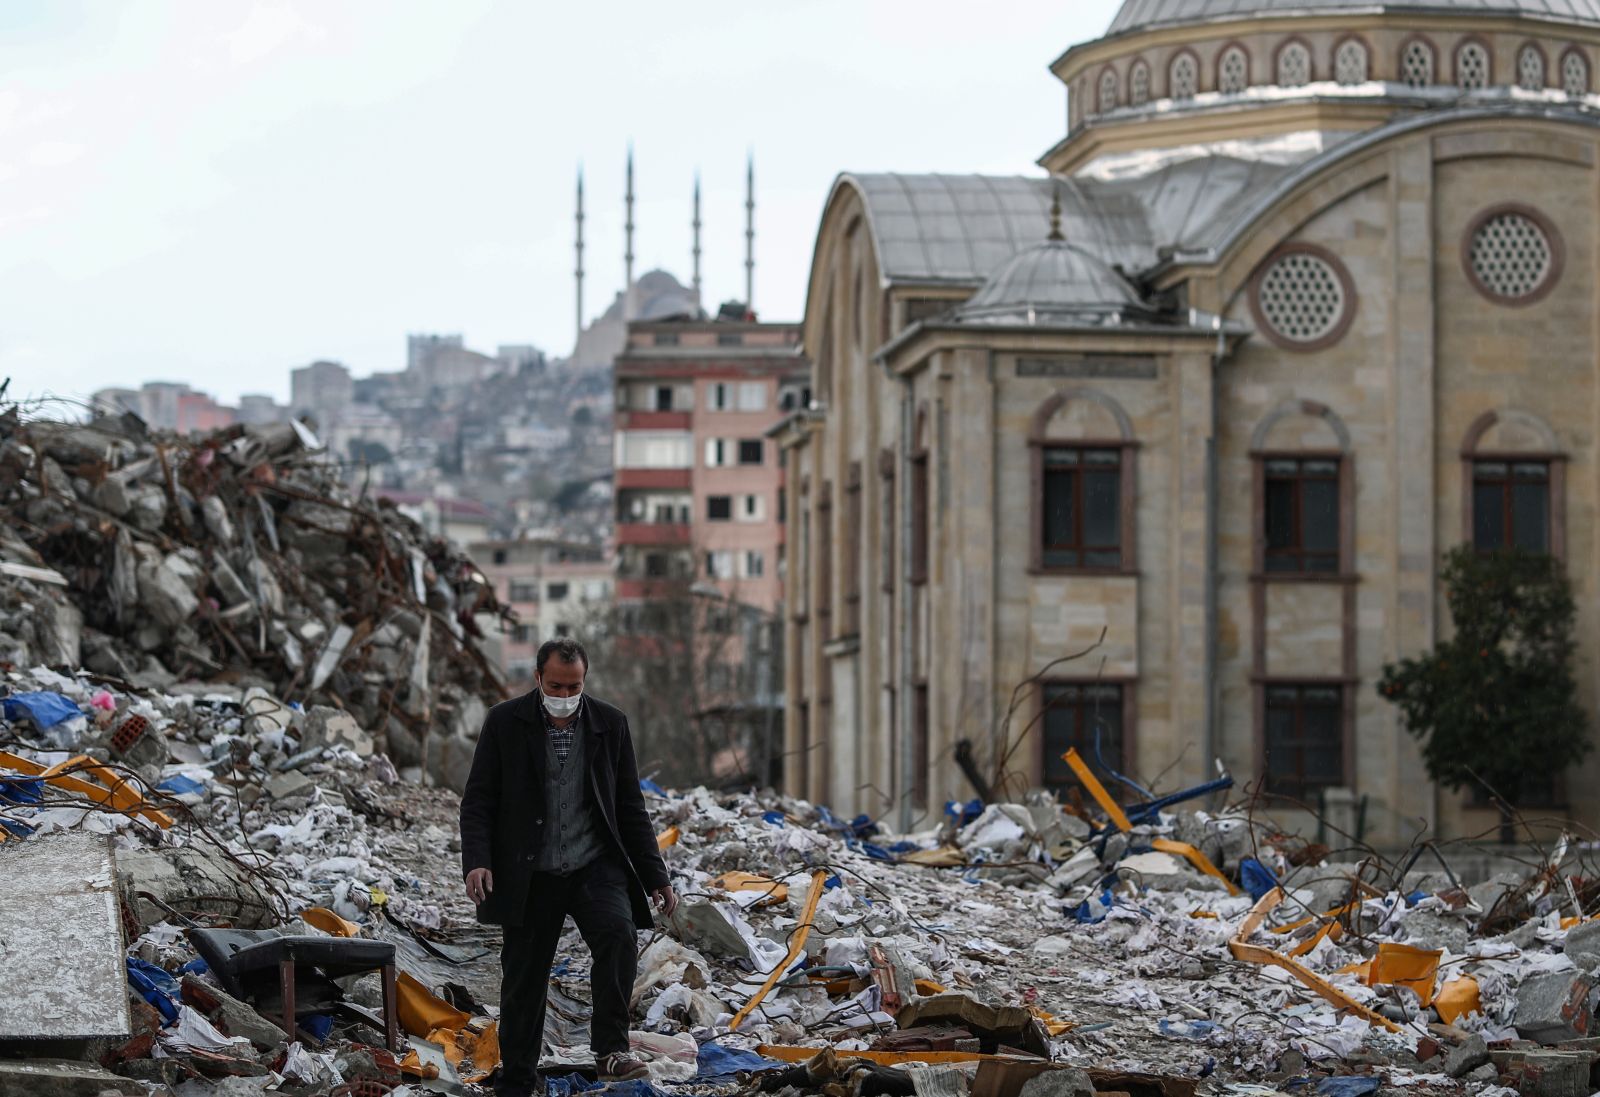 epa10541042 A man walks on debris during the Ramadan in the aftermath of a powerful earthquake in Kahramanmaras, Turkey, 24 March 2023. More than 50,000 people died and thousands more were injured after major earthquakes struck southern Turkey and northern Syria on 06 February and again on 20 February 2023.  EPA/ERDEM SAHIN